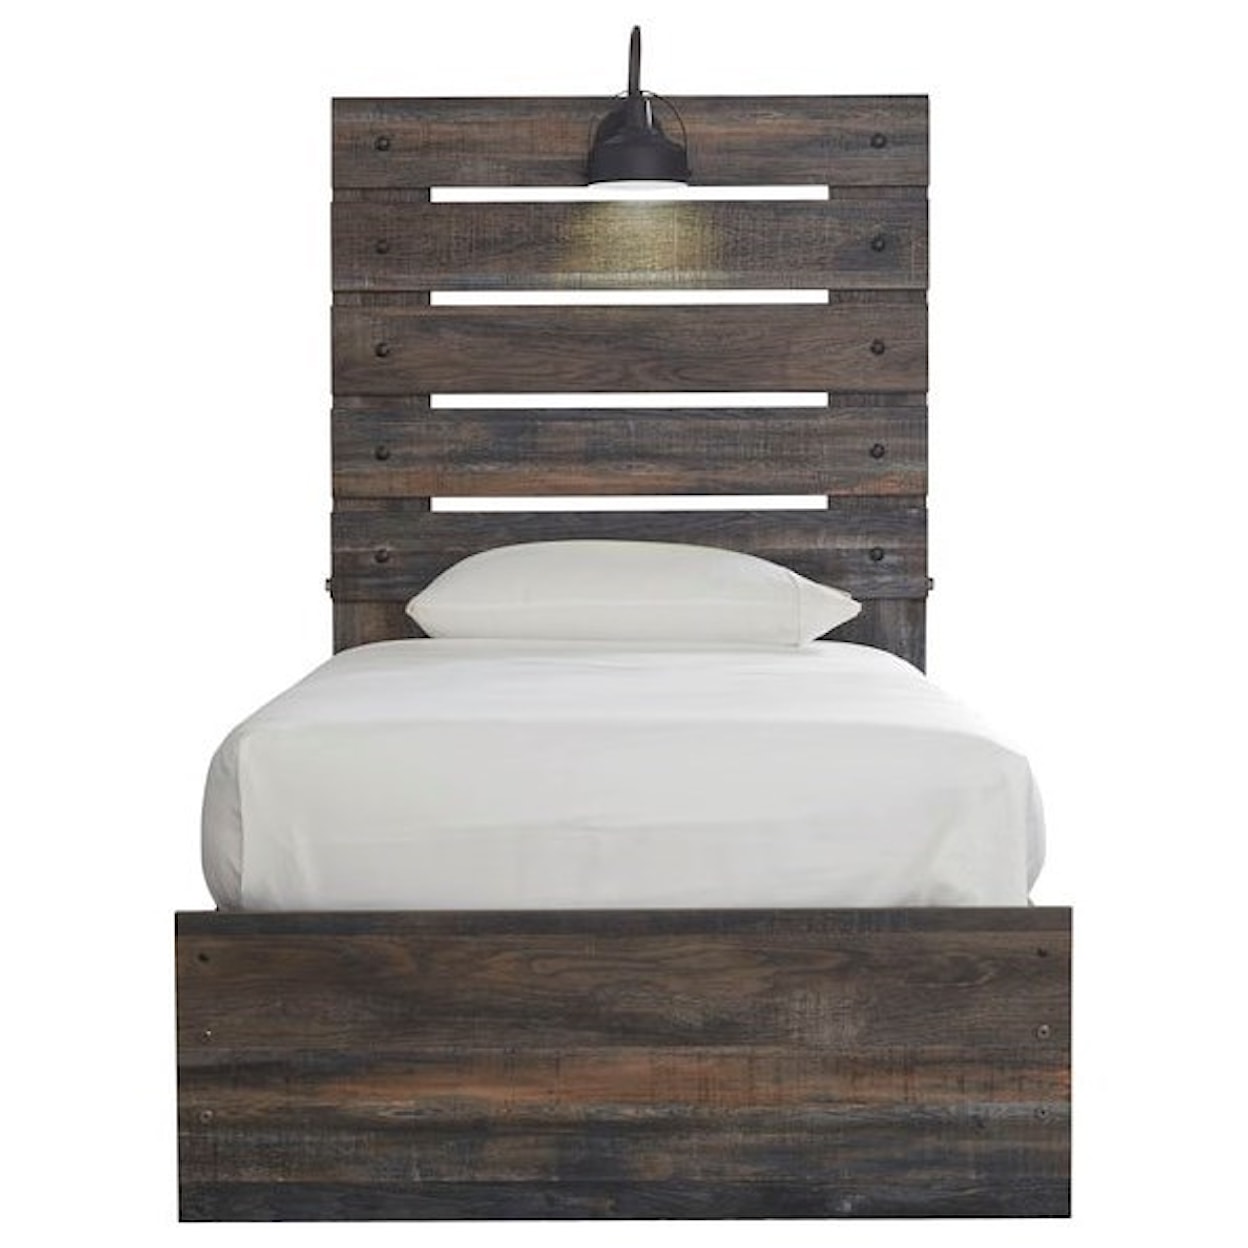 Signature Design by Ashley Furniture Drystan Twin Panel Bed